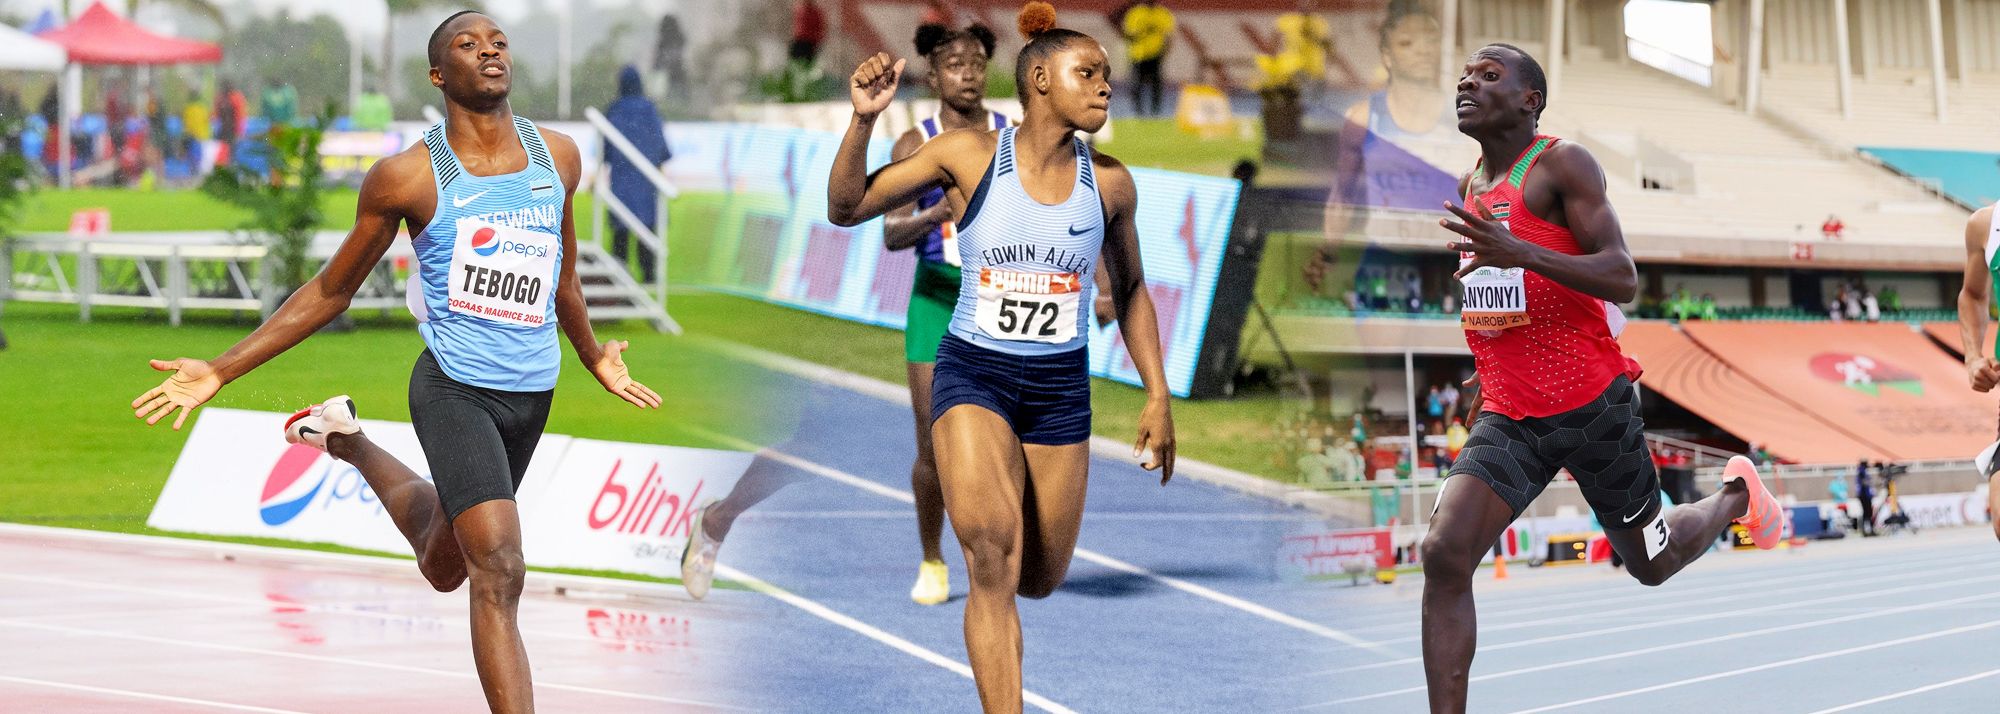 We set the scene with a month to go until the World Athletics U20 Championships Cali 22